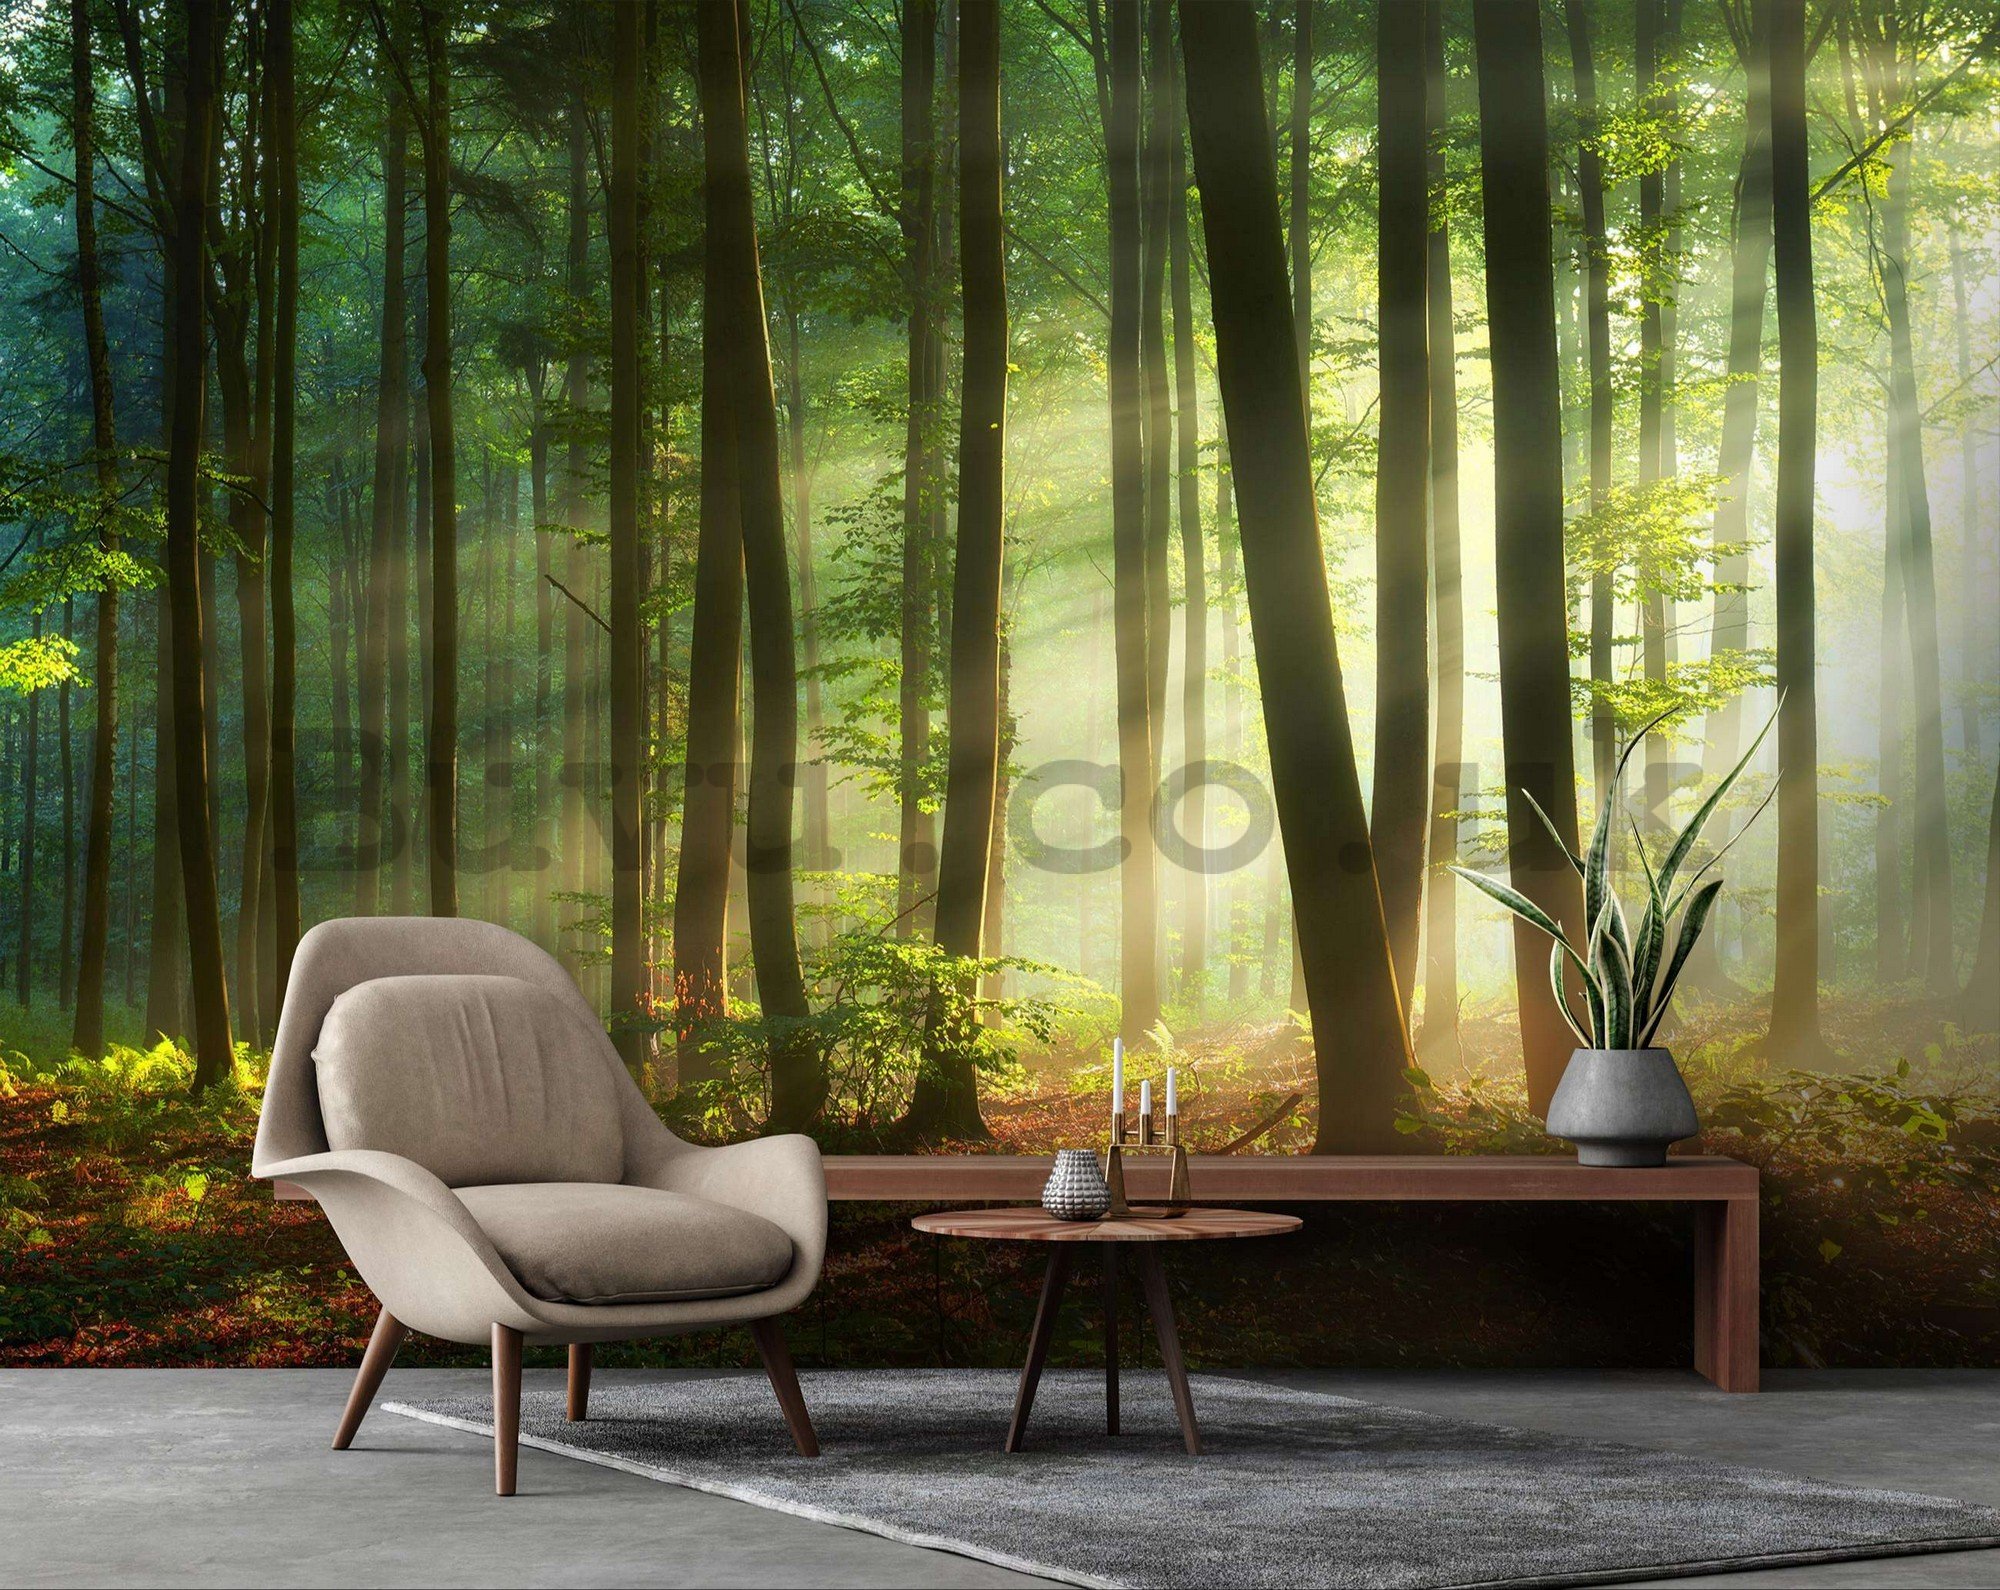 Wall mural vlies: Sunrise in the forest - 368x254 cm